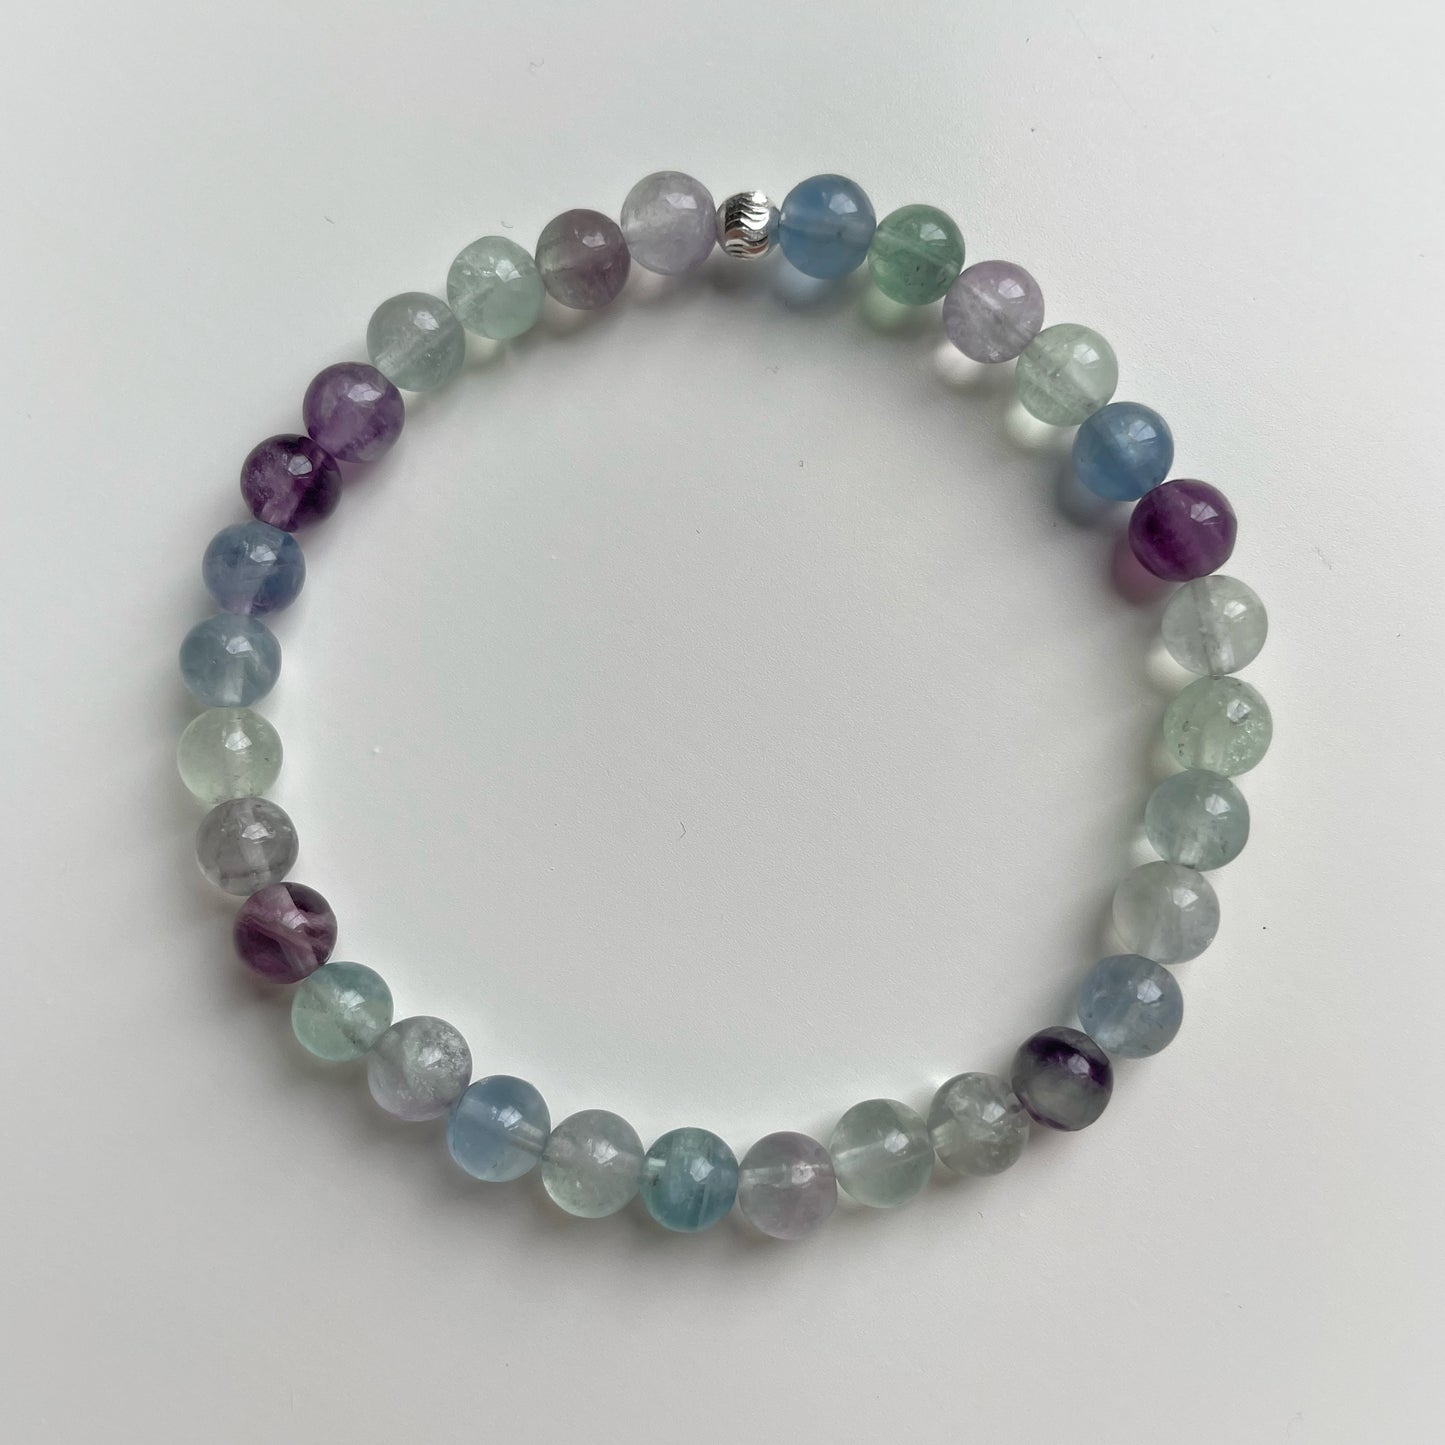 Full Moon - Fluorite bracelet for protection, balance and intellect